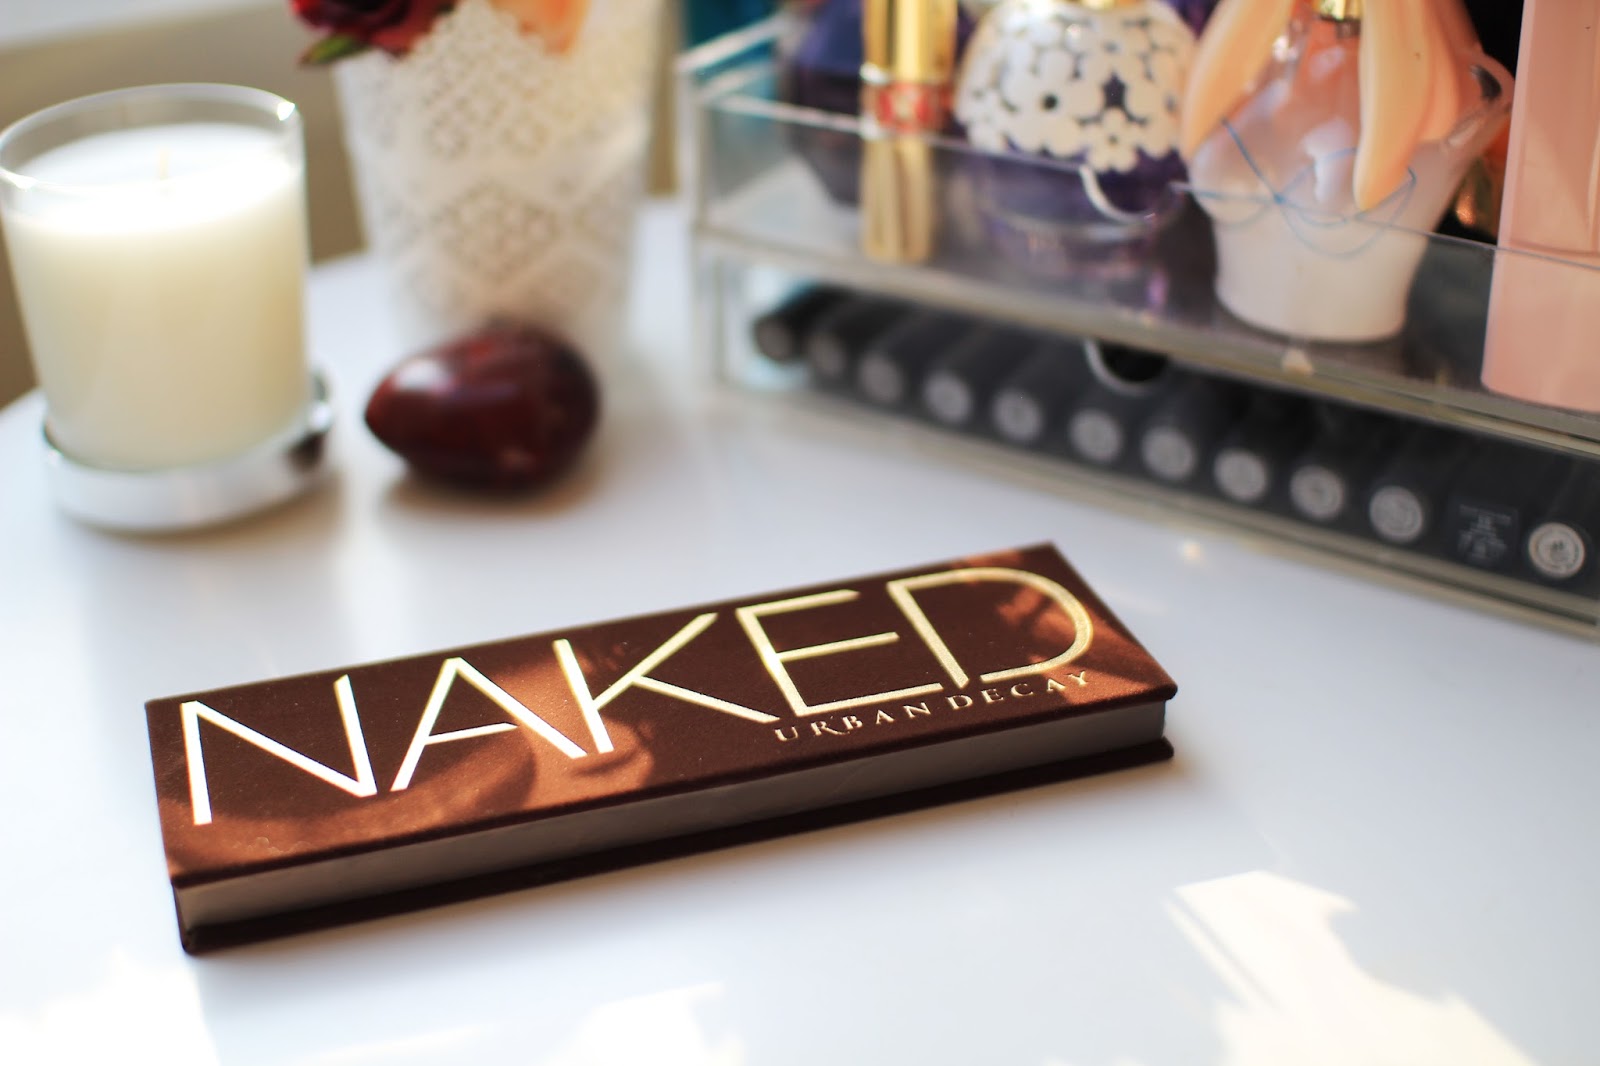 The Urban Decay Naked Palette